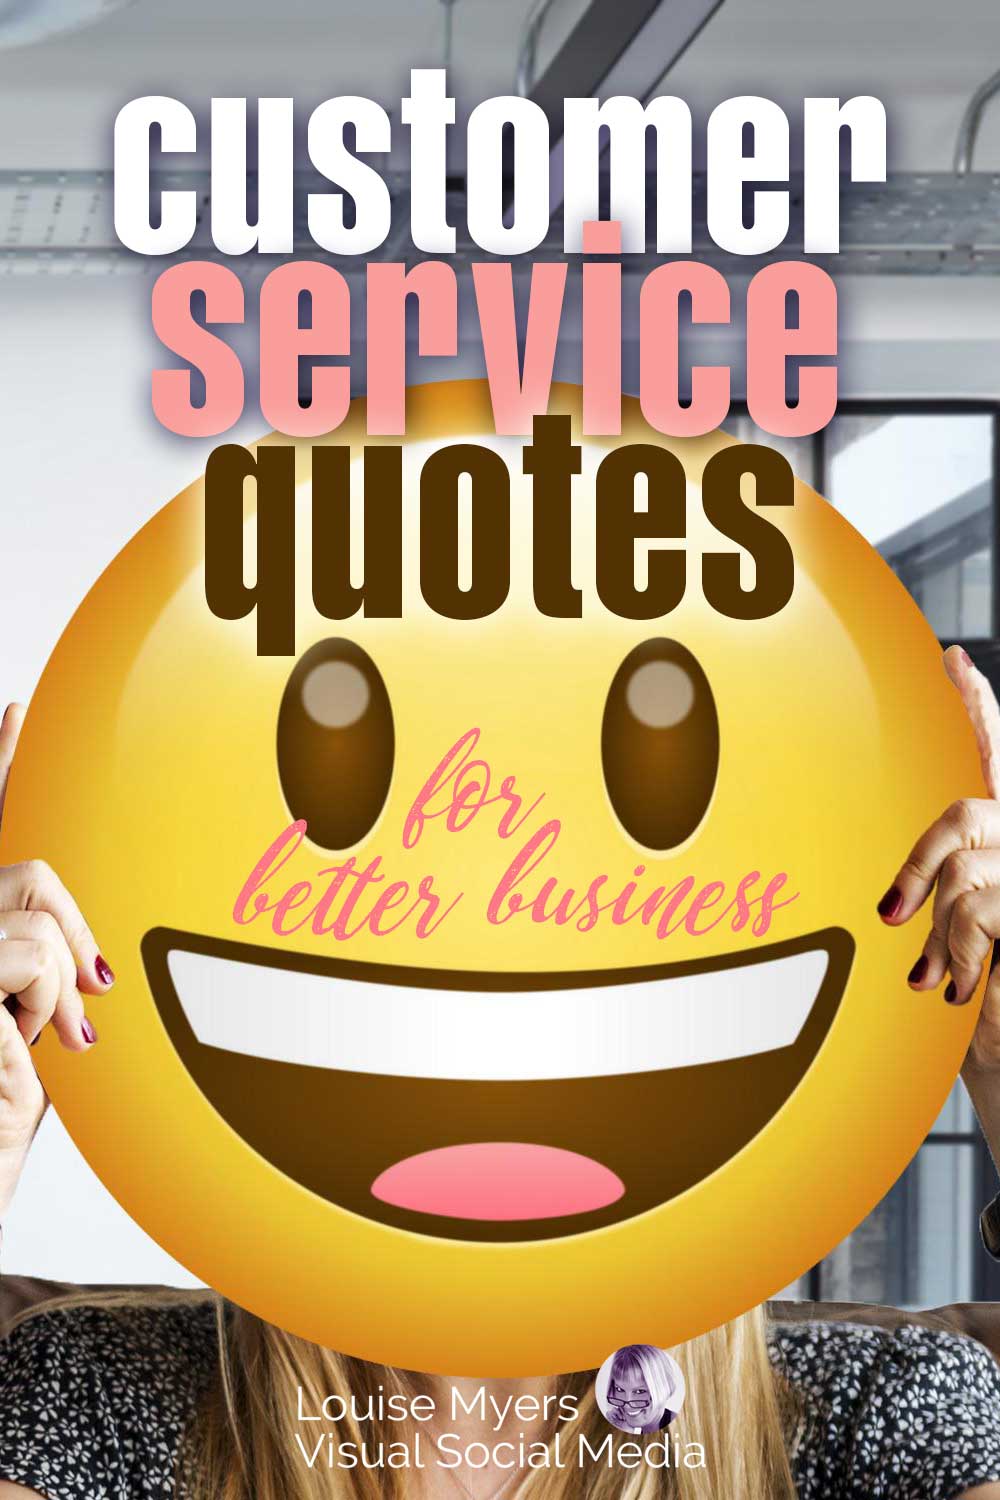 hands hold up giant smiley emoji with words customer service quotes for better business.